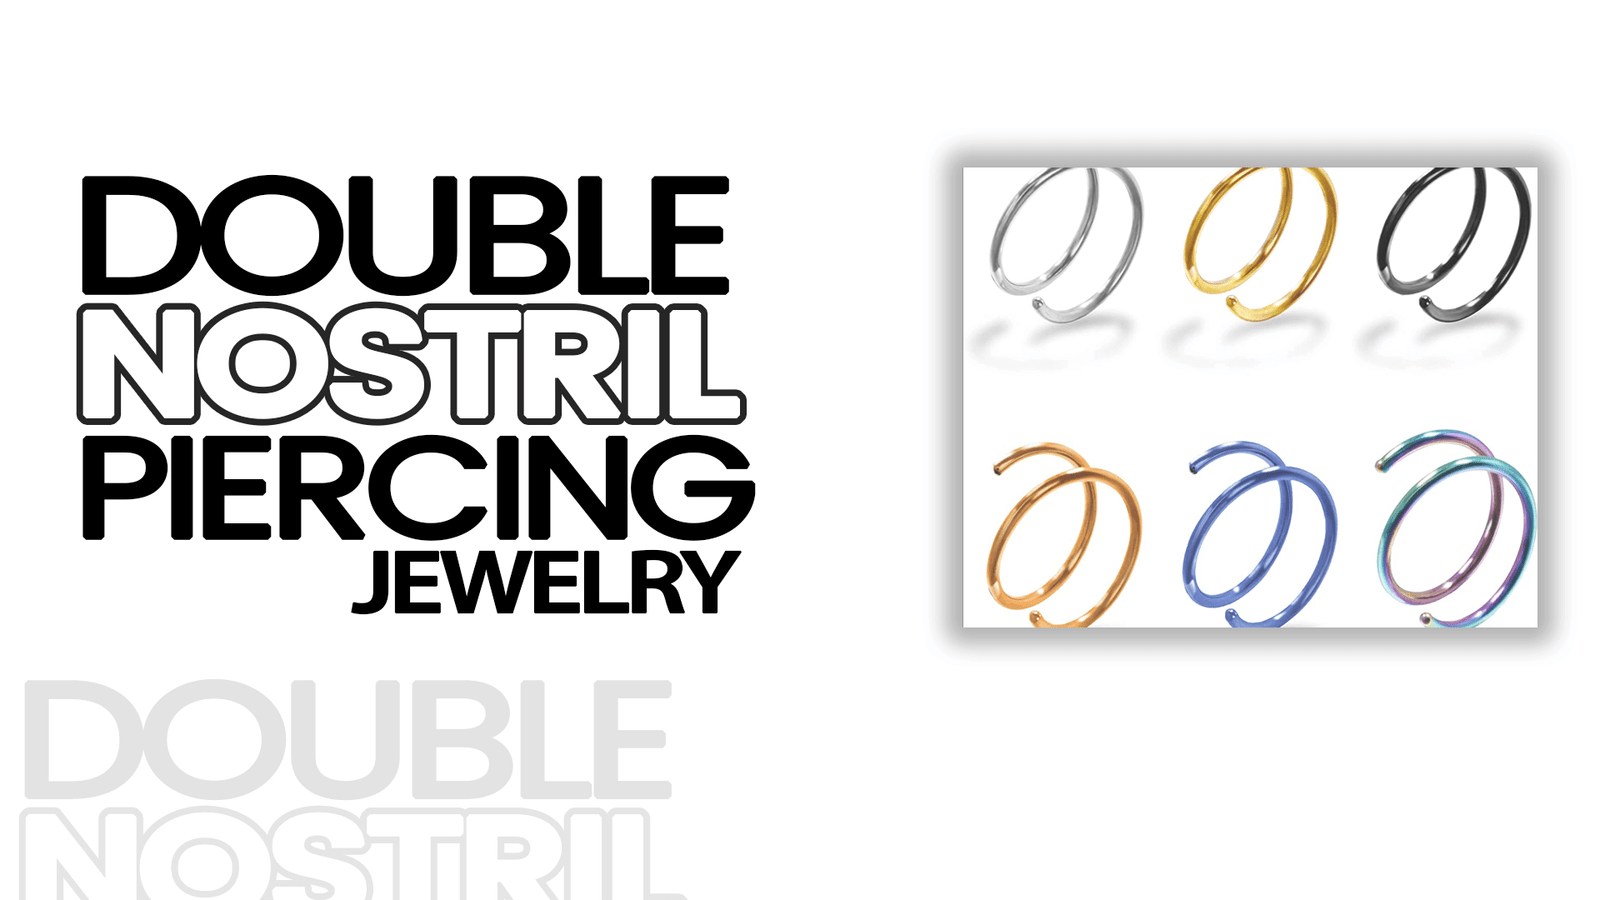 Double Nostril Piercing Jewelry